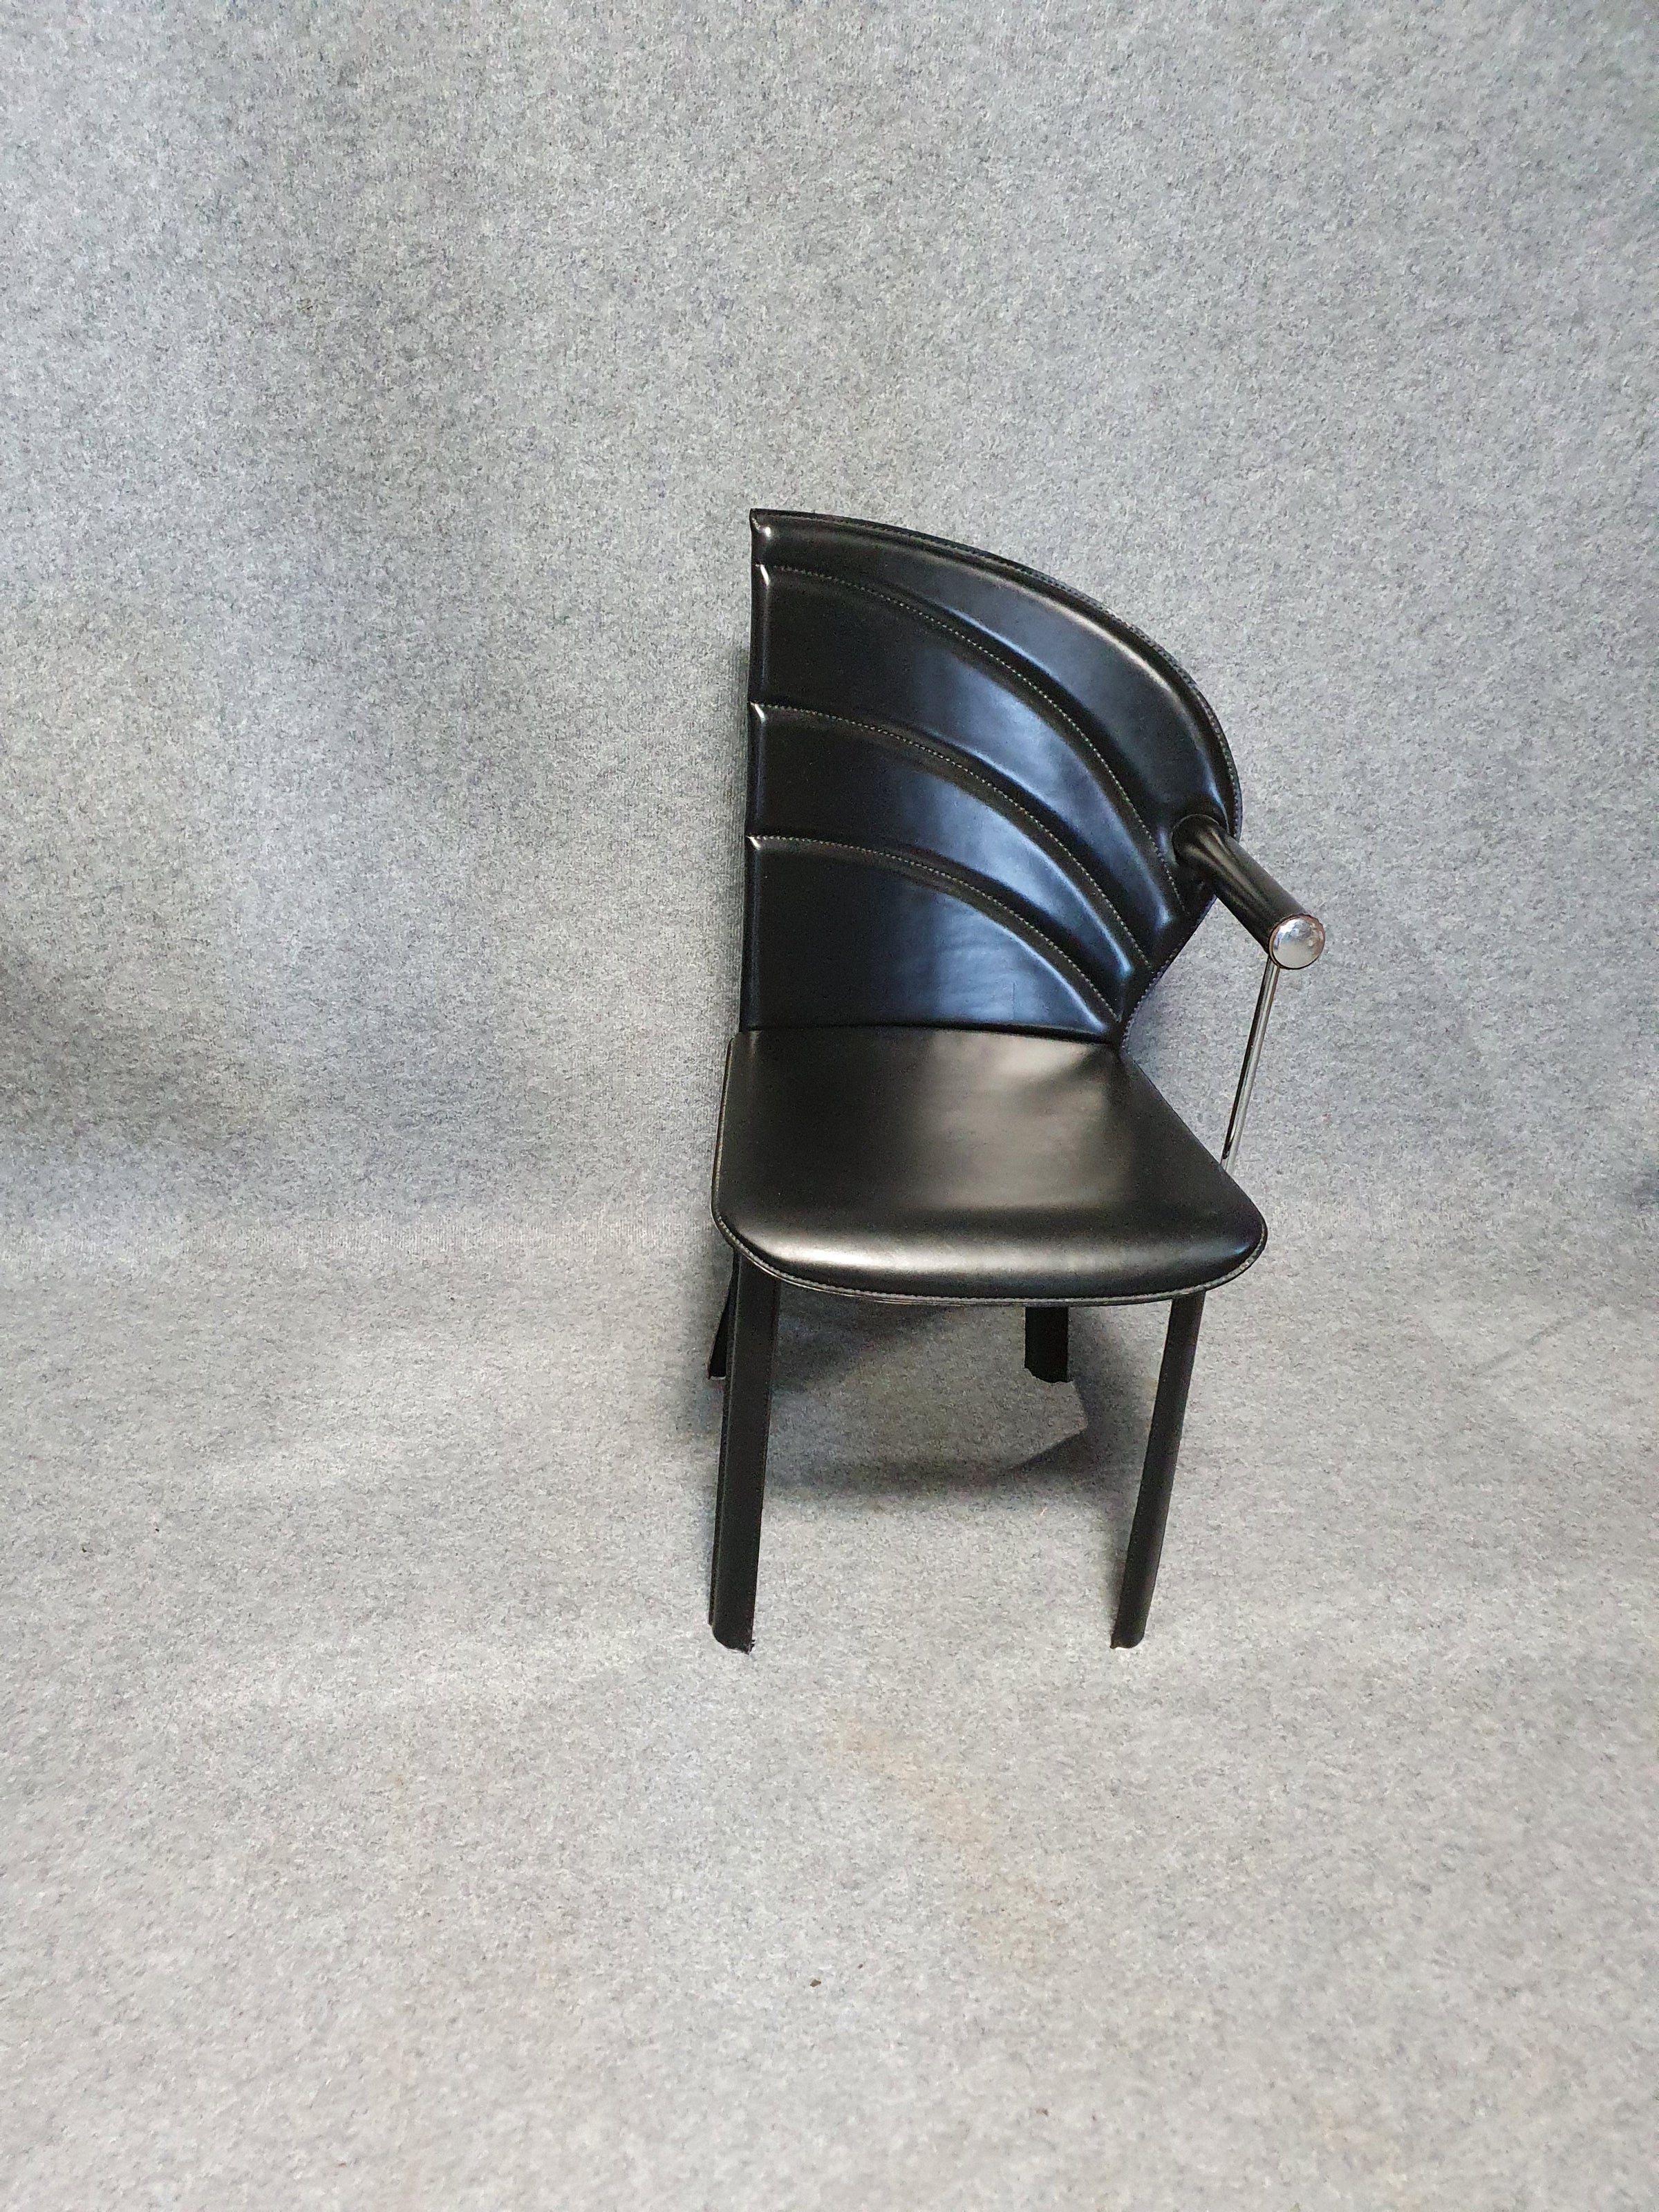 Postmodernism chairs by Naos Italy 1980